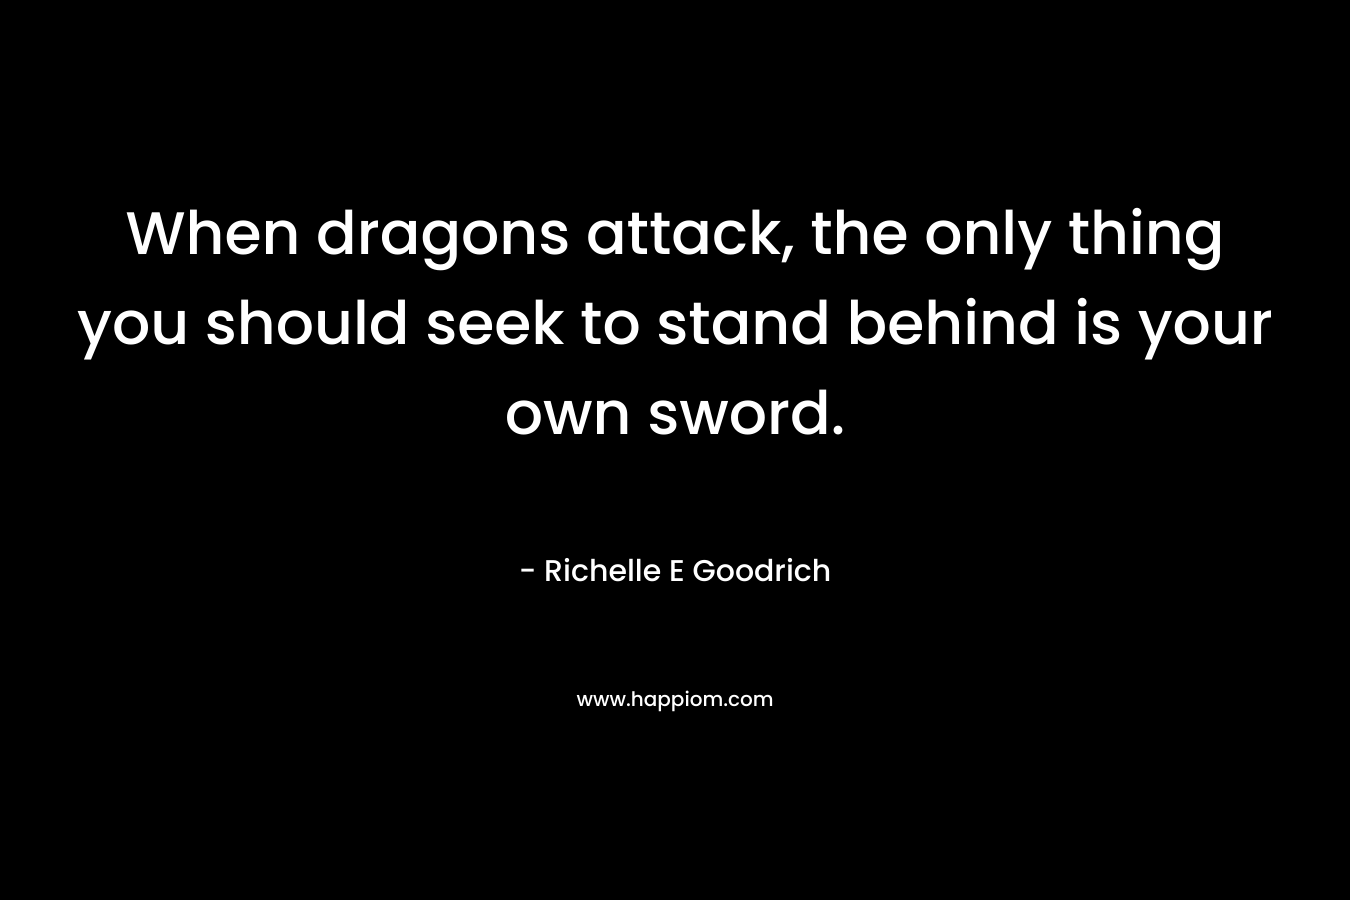 When dragons attack, the only thing you should seek to stand behind is your own sword. – Richelle E Goodrich